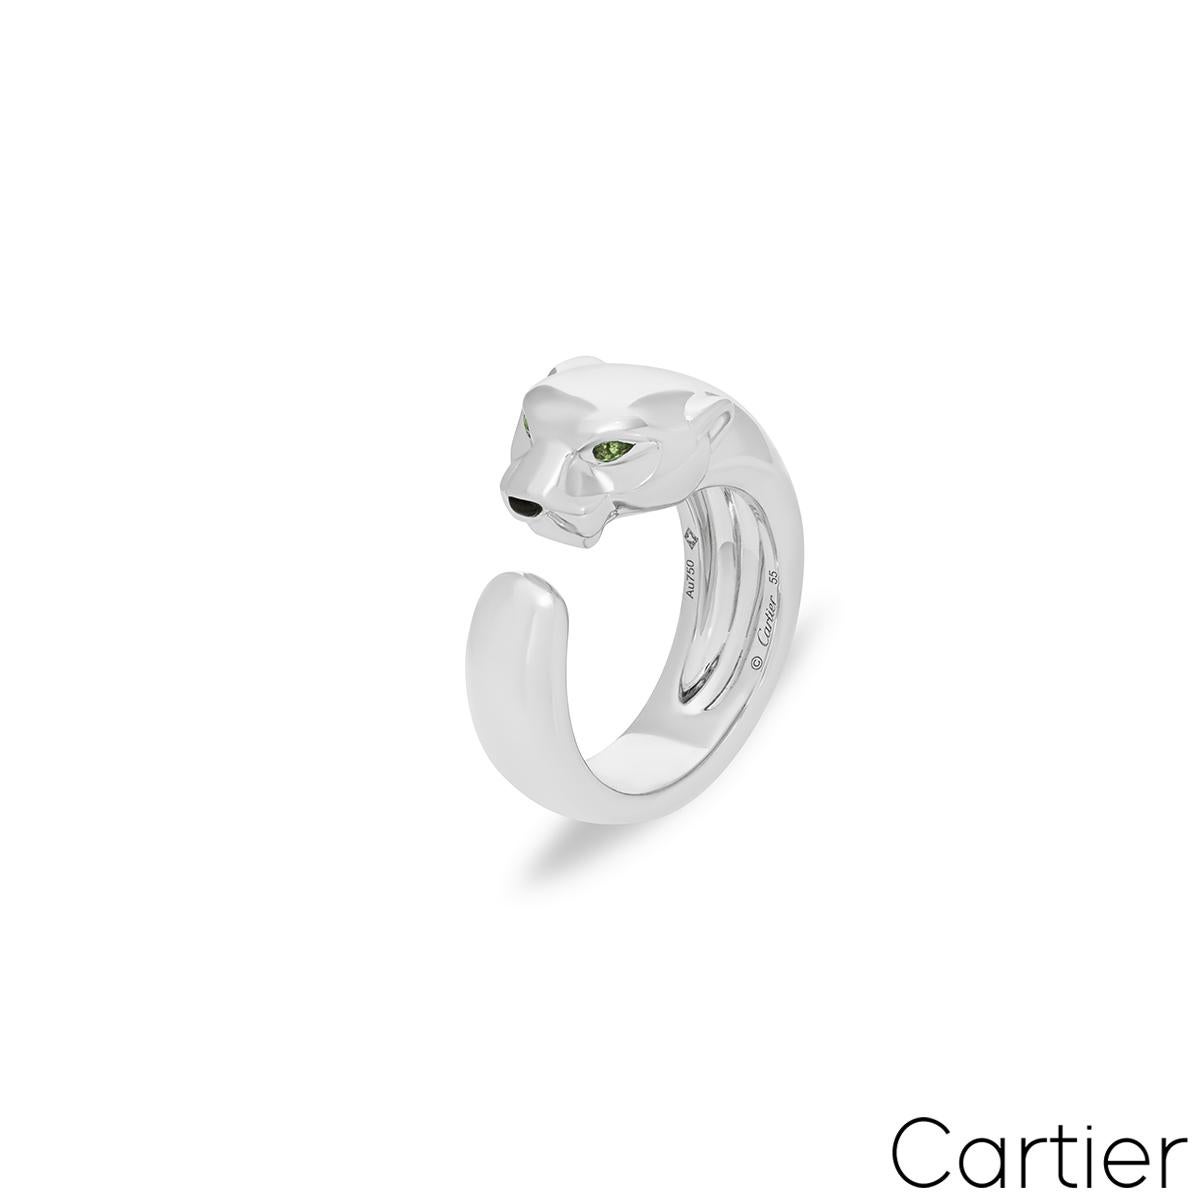 A striking 18k white gold ring by Cartier from the Panthere de Cartier collection. The ring features a panther motif that curls around the finger with 2 pear cut tsavorites as eyes and an onyx nose. The ring measures 11mm wide, is a UK size O/ US